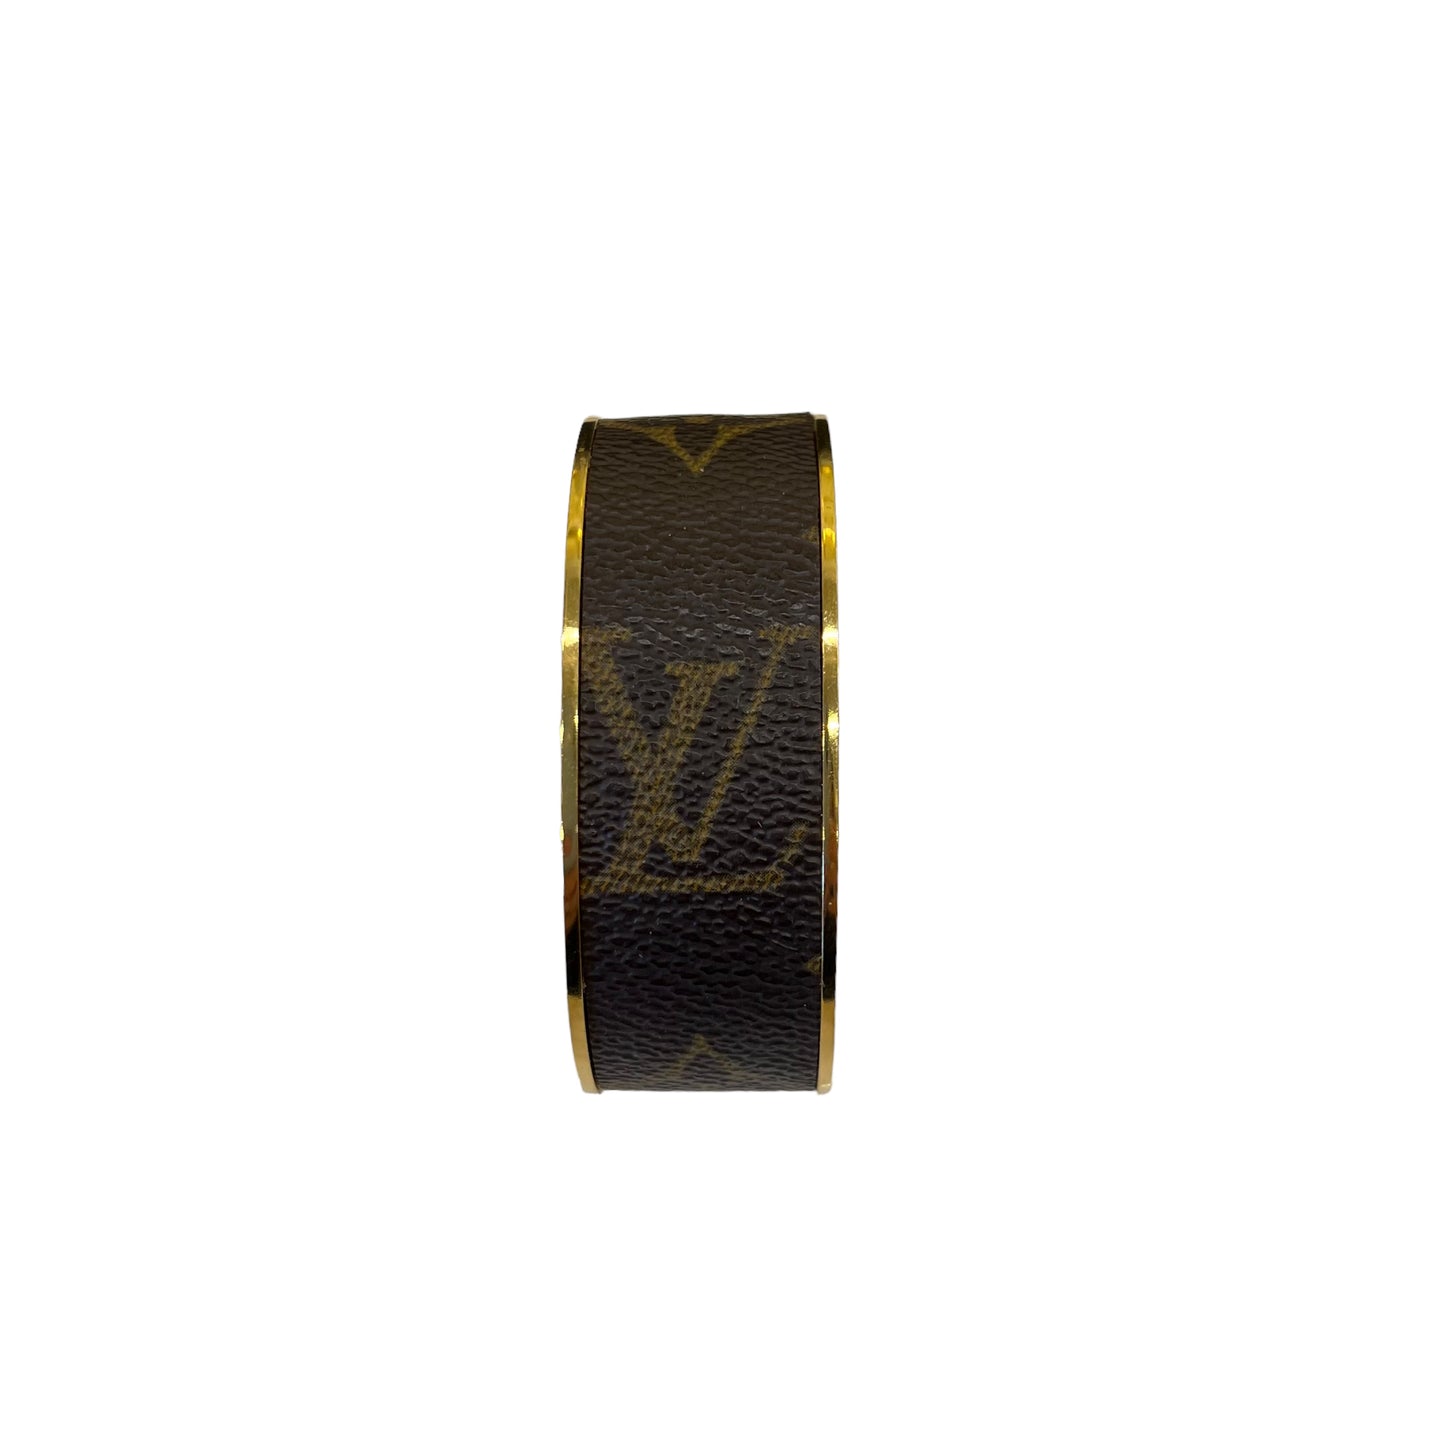 Small upcycled LV Cuff